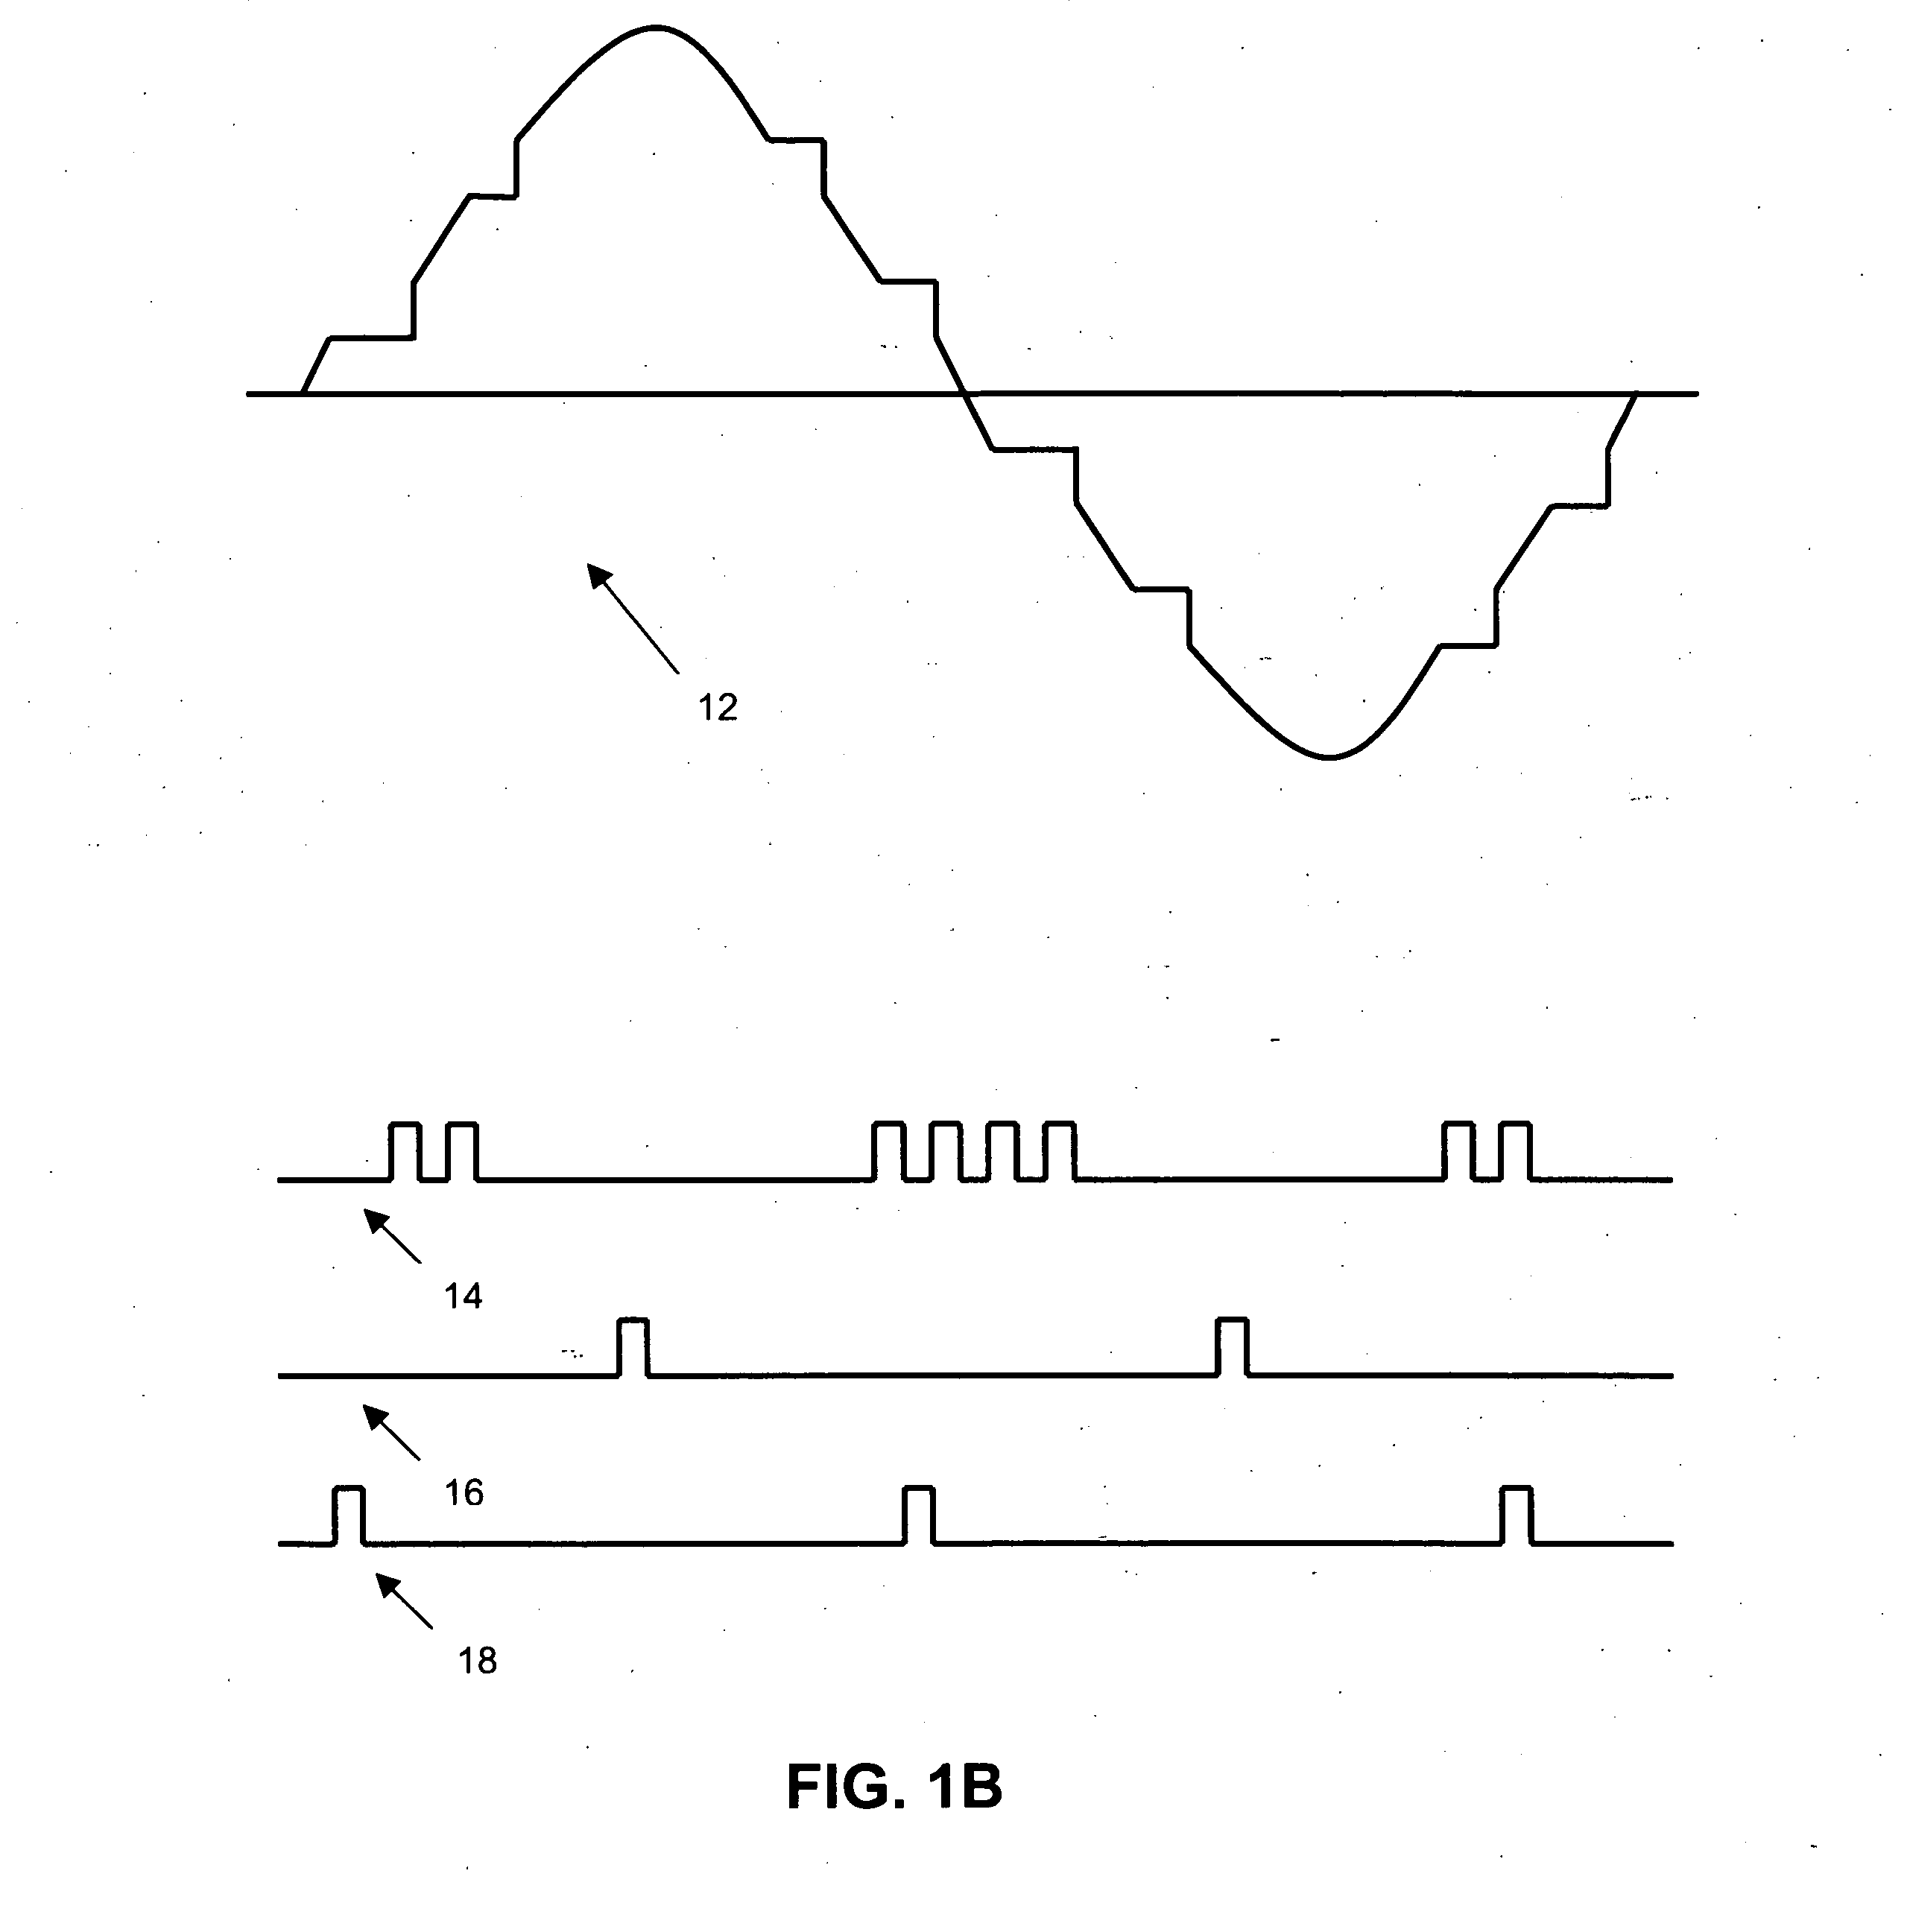 Single and multiple sinewave modulation and demodulation techniques employing carrier-zero and carrier-peak data-word start and stop